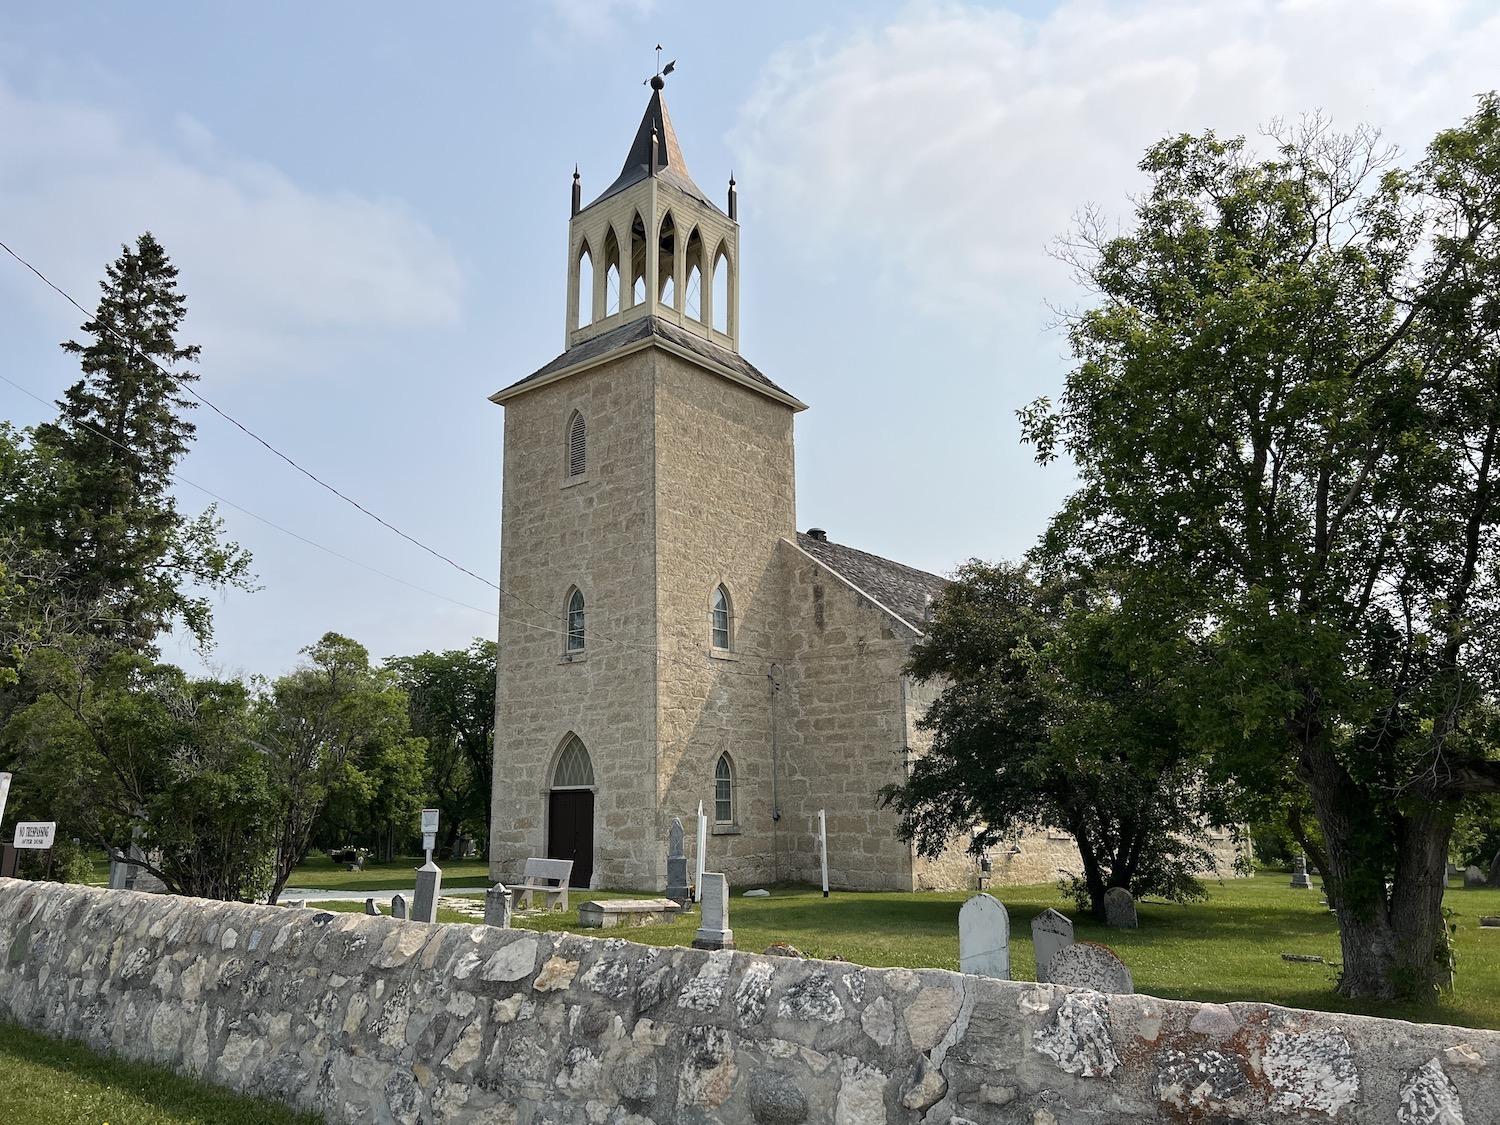 St. Andrew's Anglican Church is a national historic site made of local limestone.